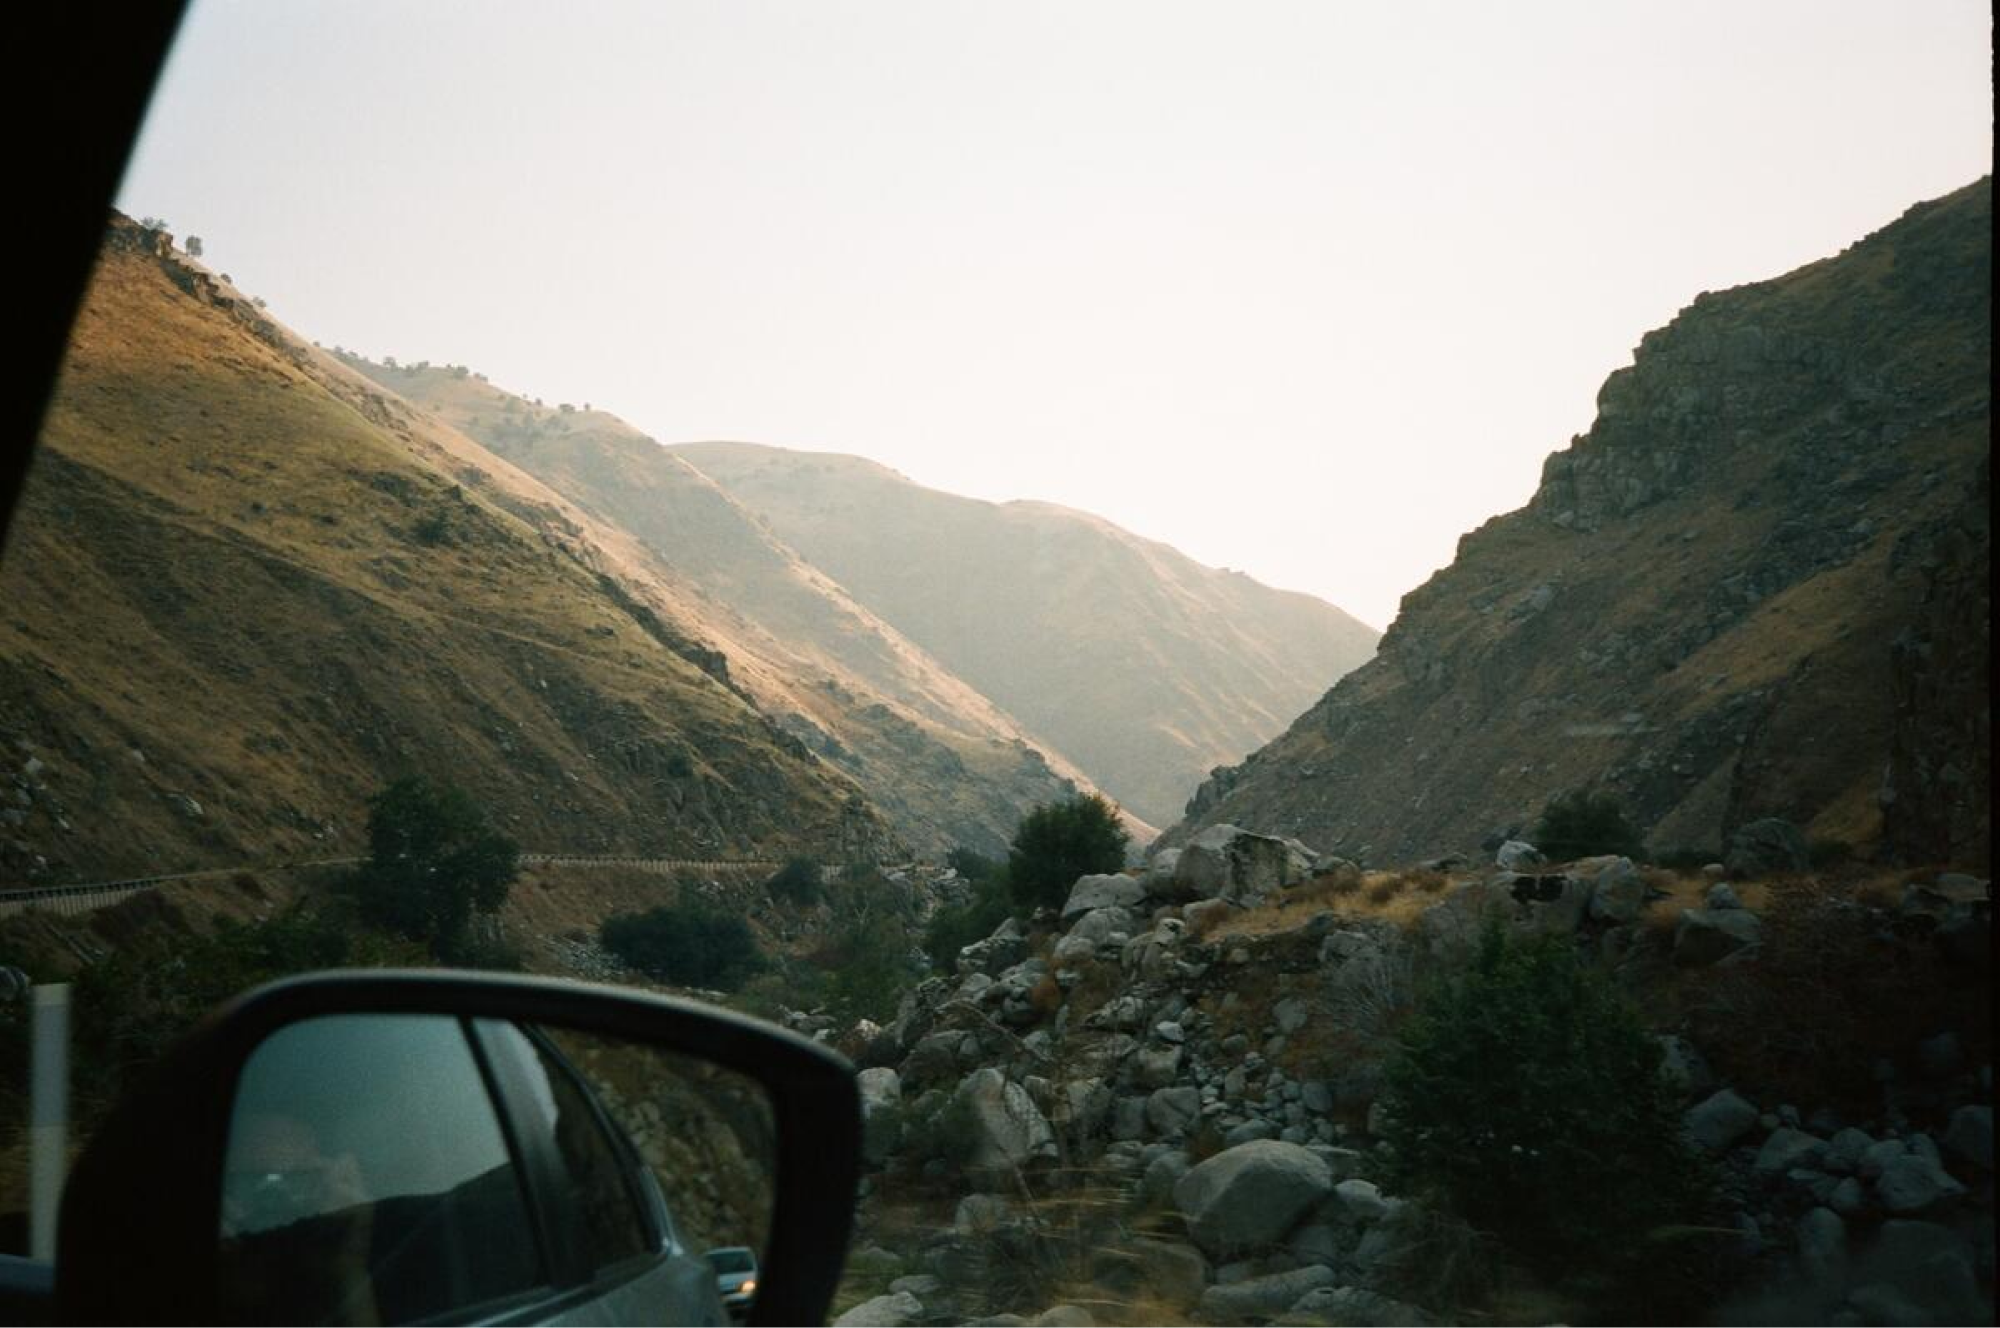 From inside of a car: past the rearview mirror, a view of a rocky canyon.